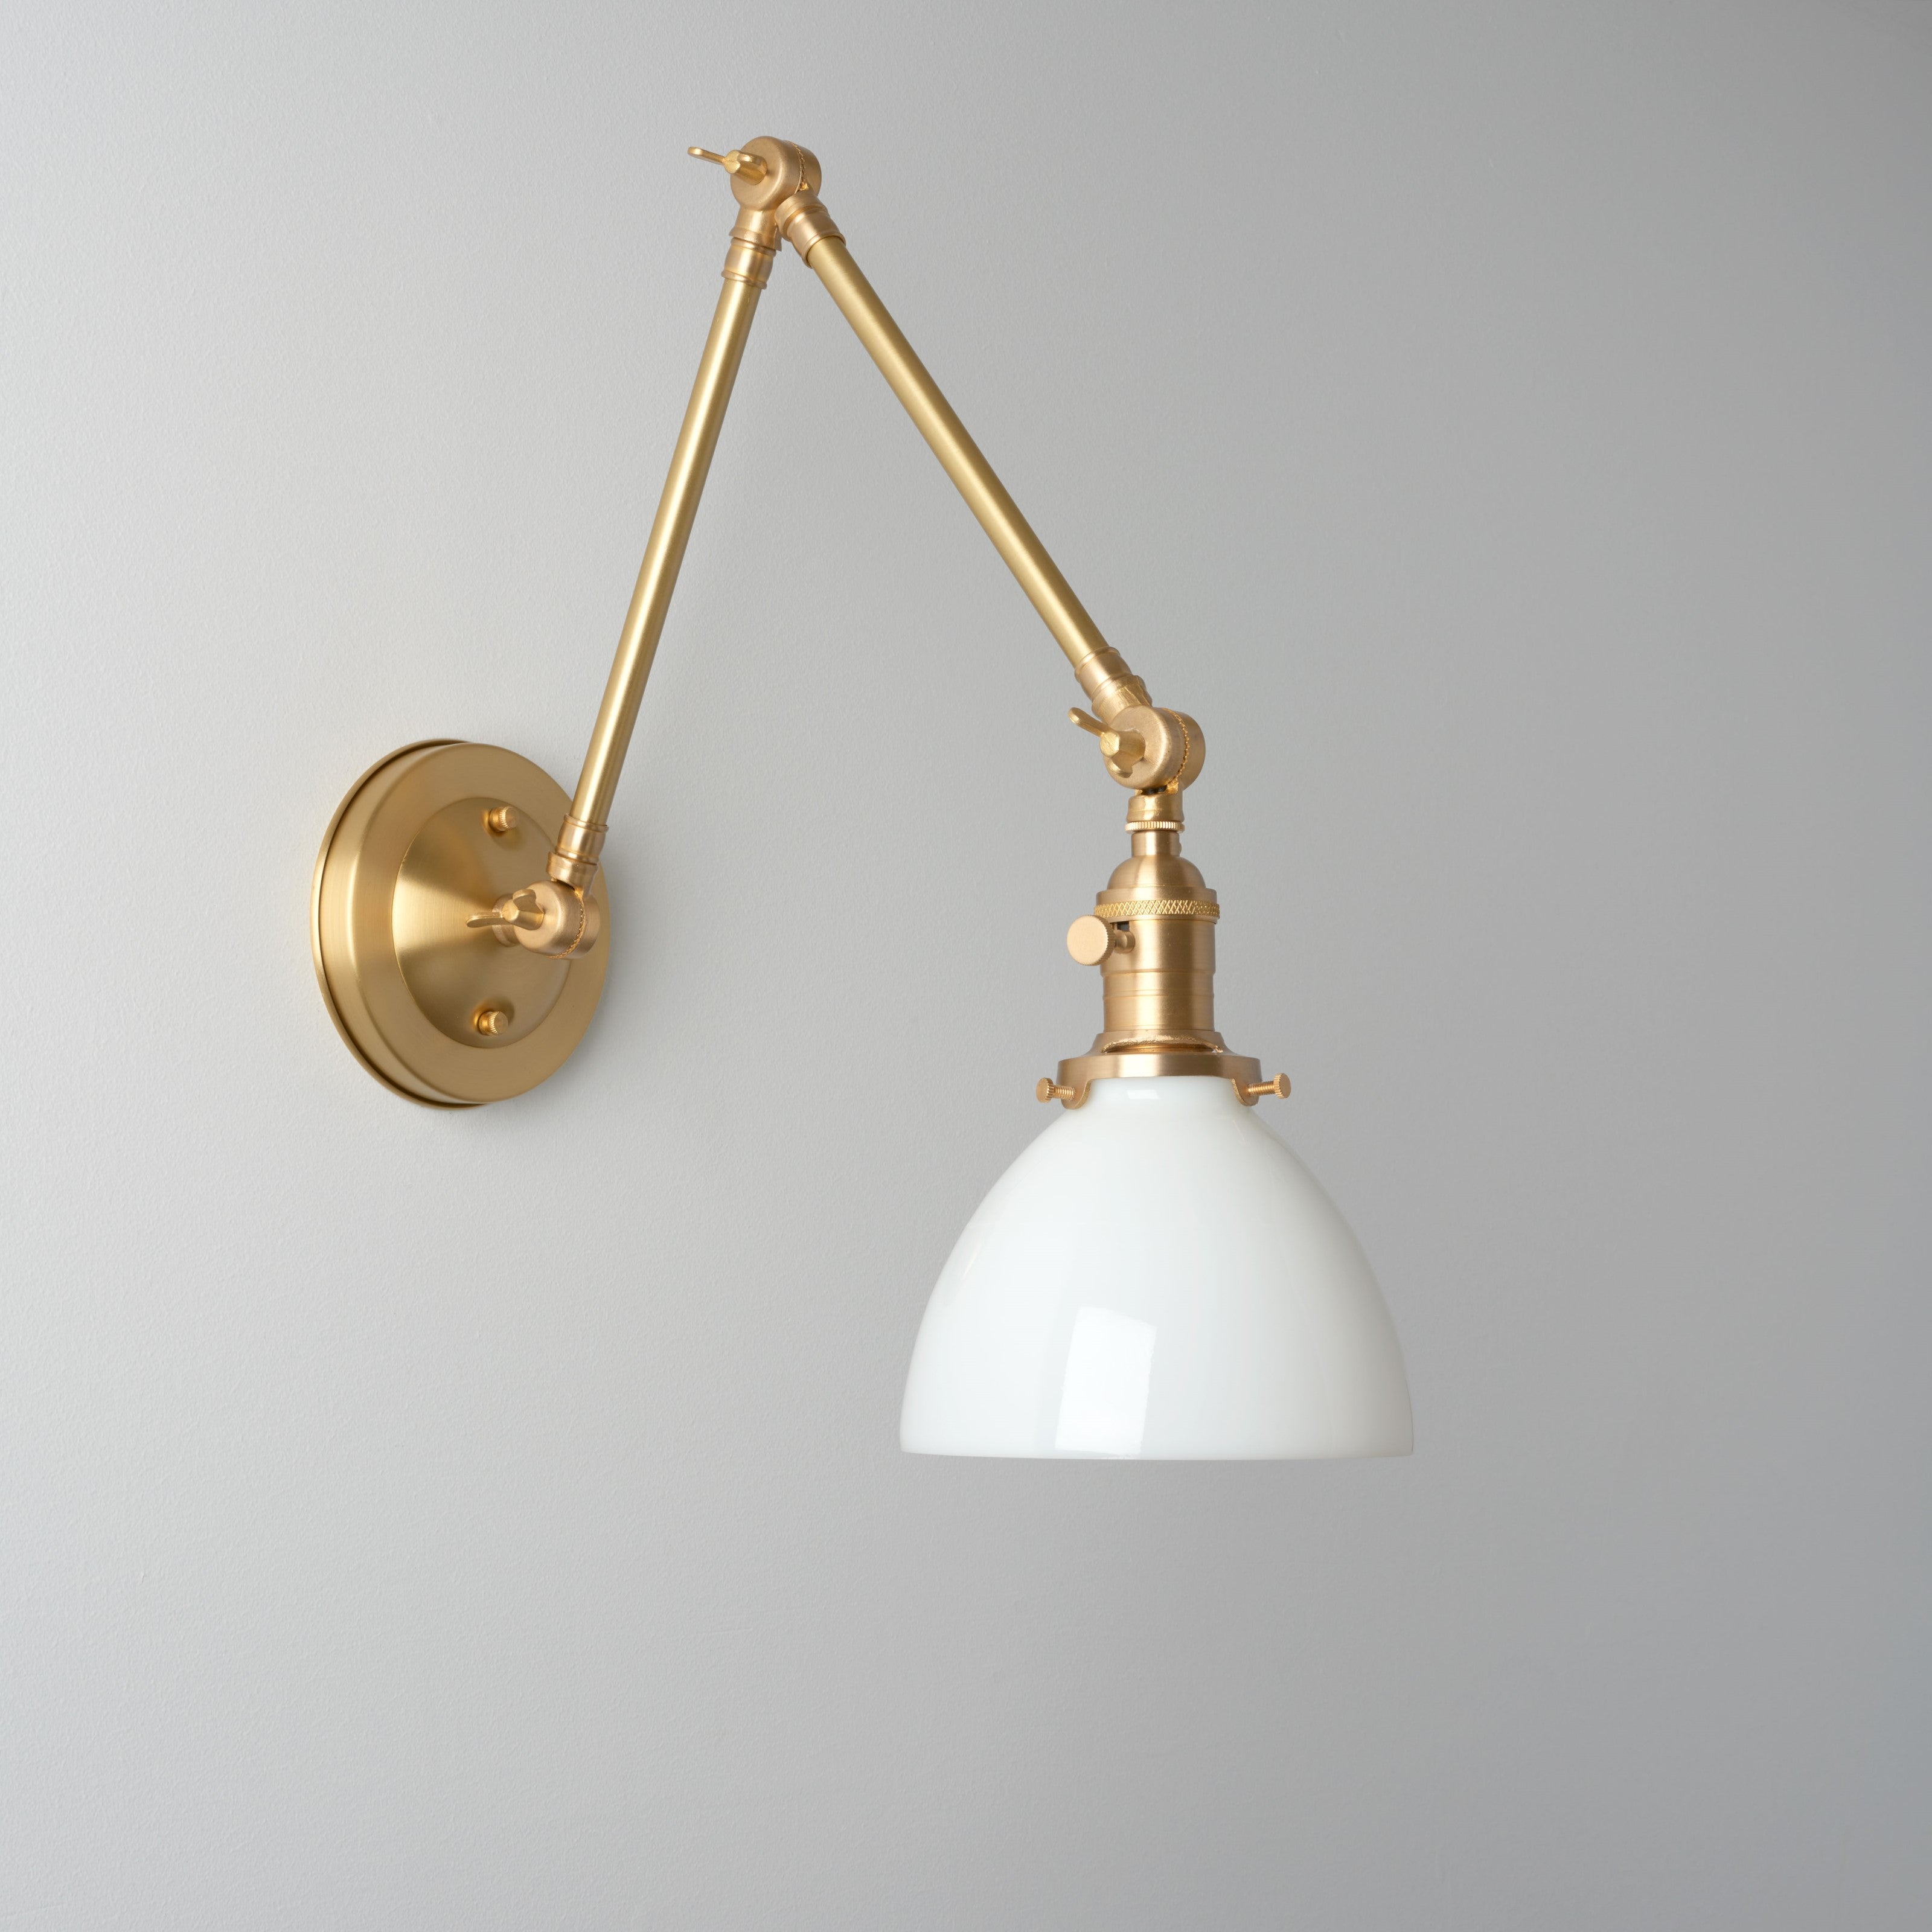 Thetford (6 or 8") | Adjustable Arms Sconce